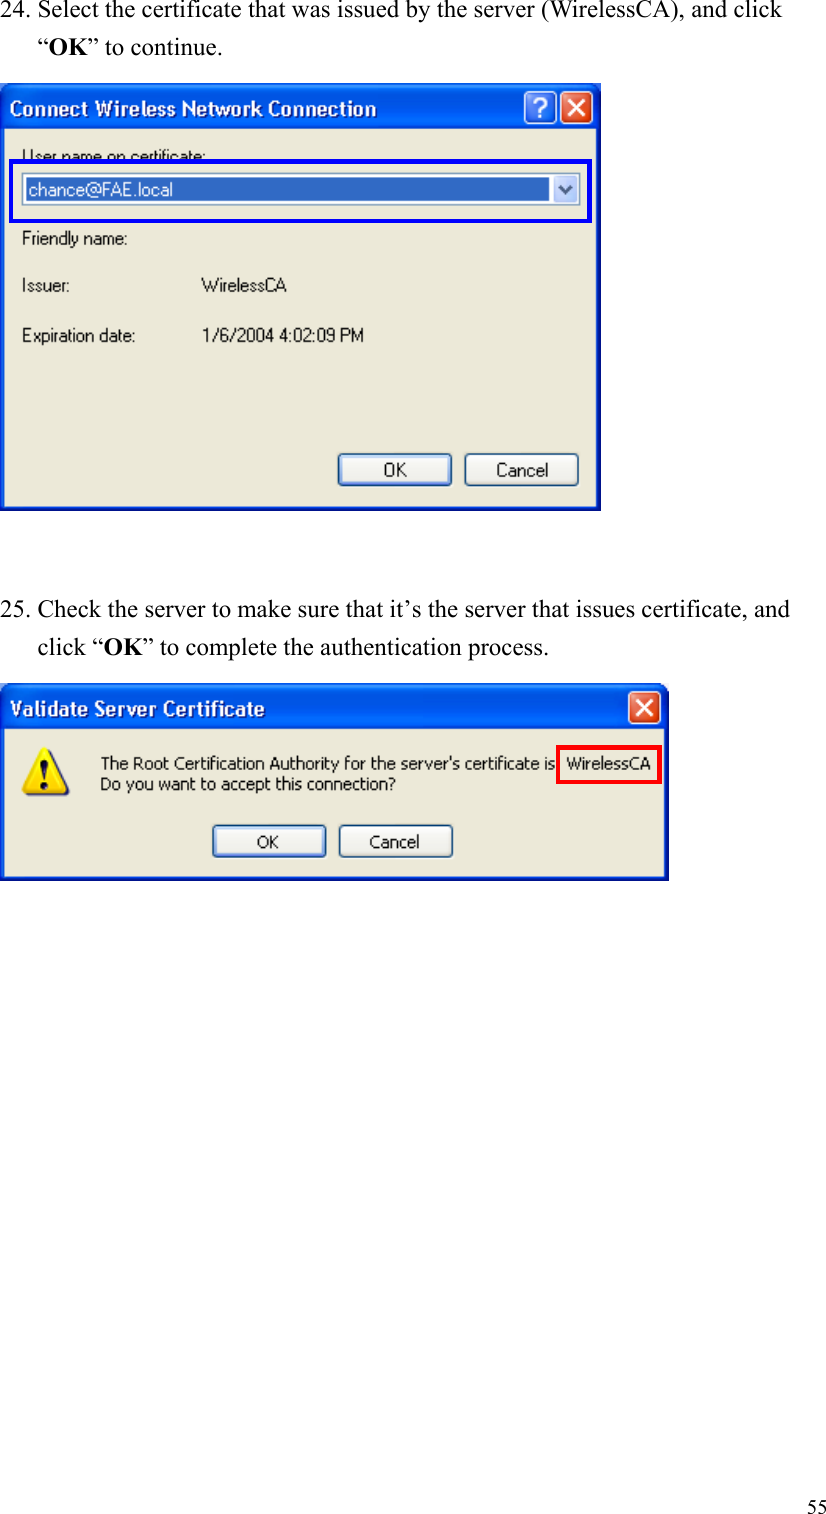 5524. Select the certificate that was issued by the server (WirelessCA), and click“OK” to continue.25. Check the server to make sure that it’s the server that issues certificate, andclick “OK” to complete the authentication process.